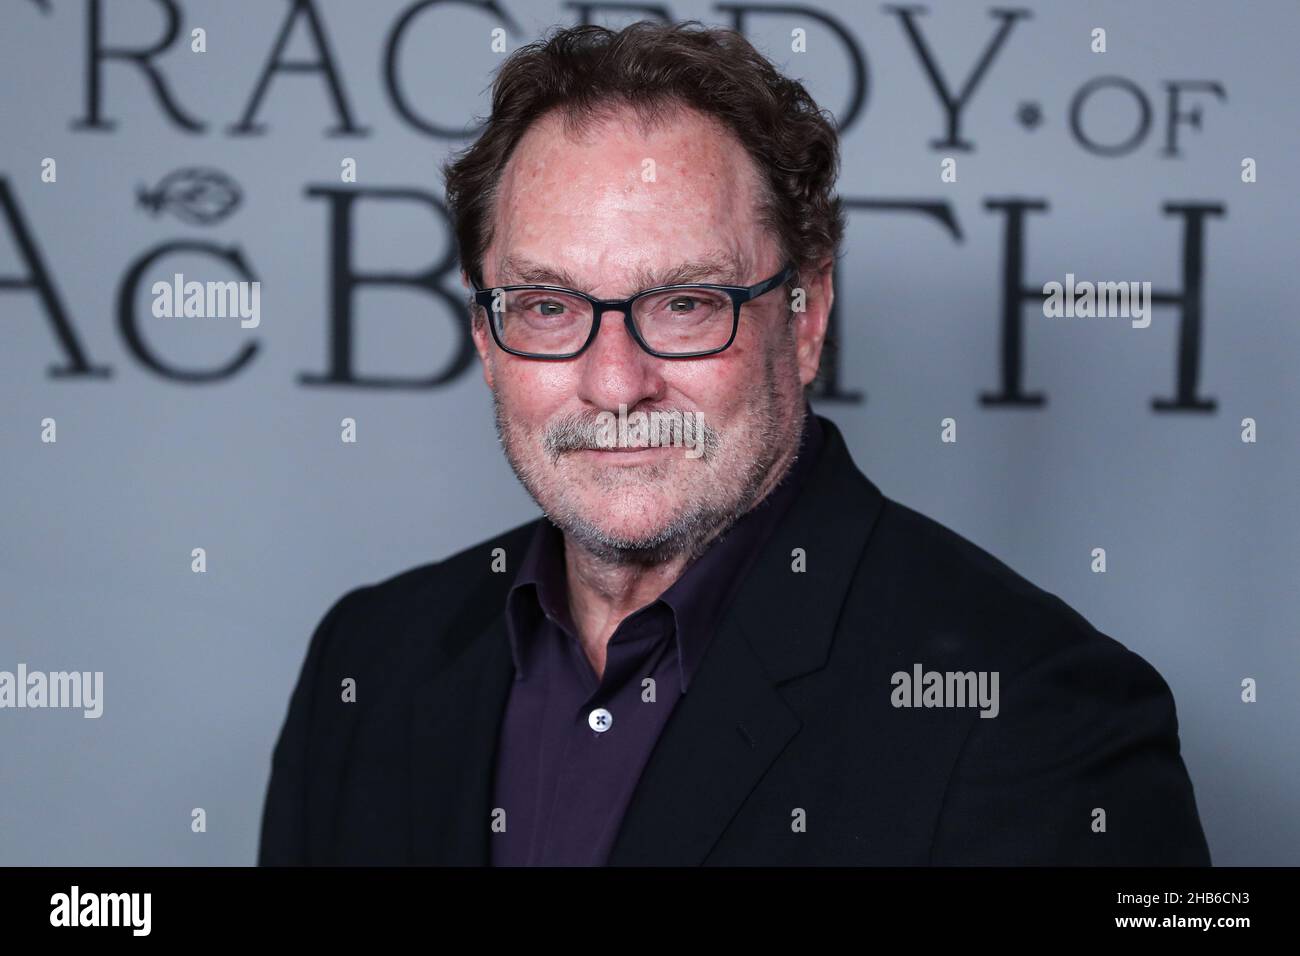 Los Angeles, USA. 16th Dec, 2021. LOS ANGELES, CALIFORNIA, USA - DECEMBER 16: American actor Stephen Root arrives at the Los Angeles Premiere Of Apple Original Films' and A24's 'The Tragedy Of Macbeth' held at the Directors Guild of America Theater Complex on December 16, 2021 in Los Angeles, California, USA. (Photo by Xavier Collin/Image Press Agency/Sipa USA) Credit: Sipa USA/Alamy Live News Stock Photo